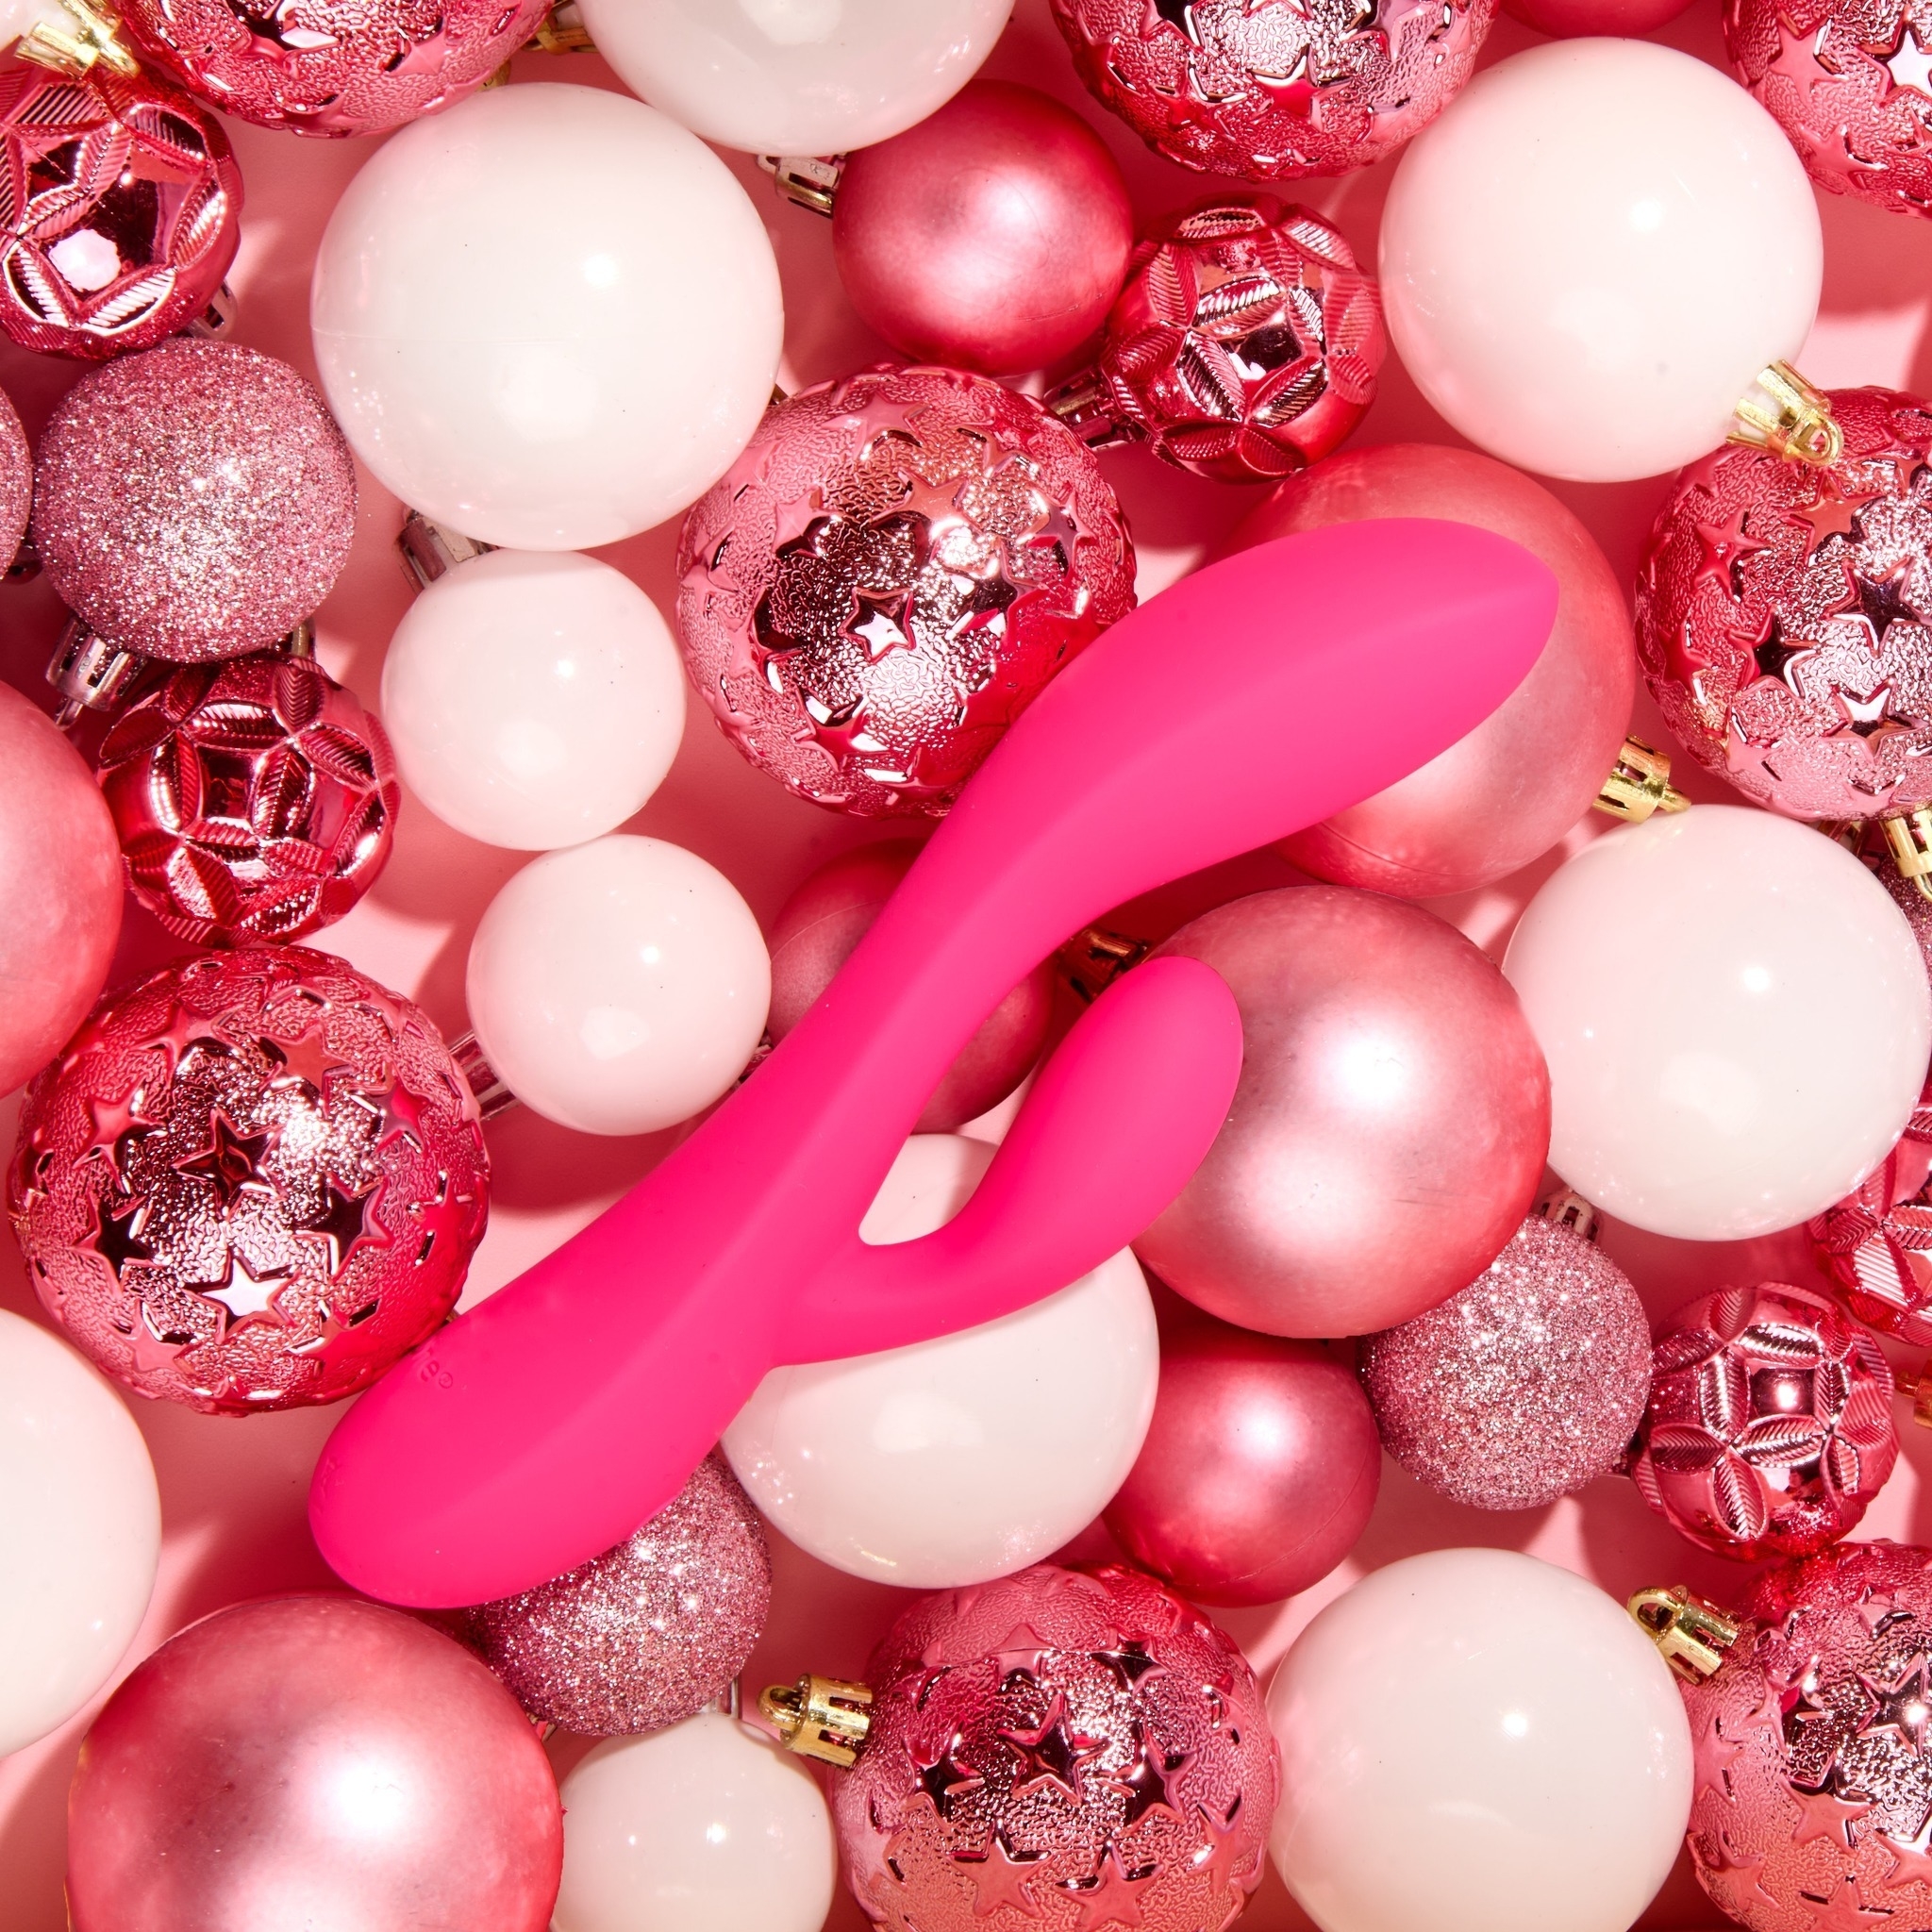 pink vibrator among pink and white baubles